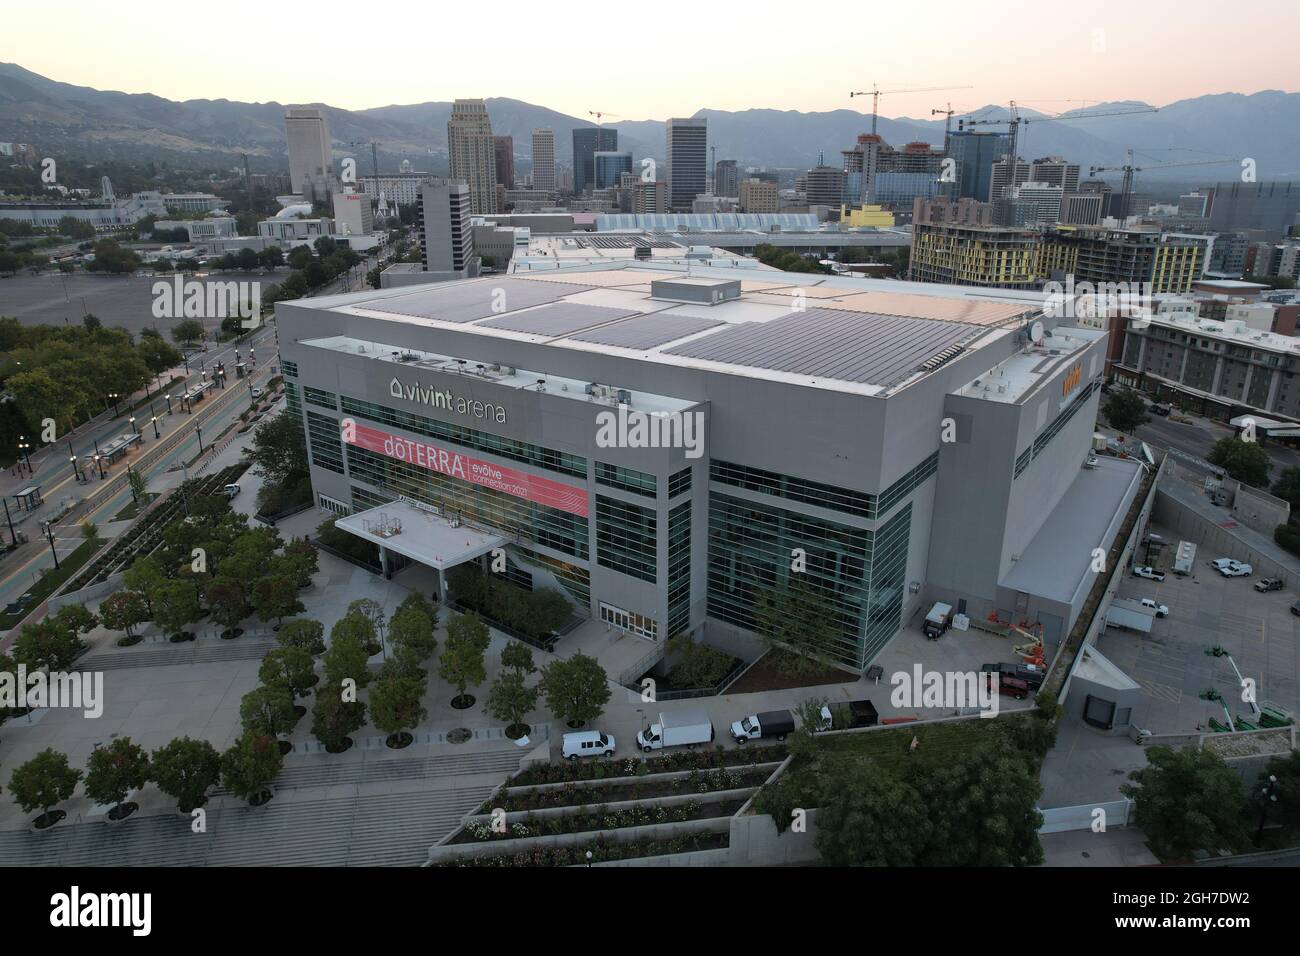 An aerial view of Vivint Smart Home Arena, Sunday, Sept. 5, 2021, in Salt Lake City. The venue is the home of the Utah Jazz of the NBA. Stock Photo